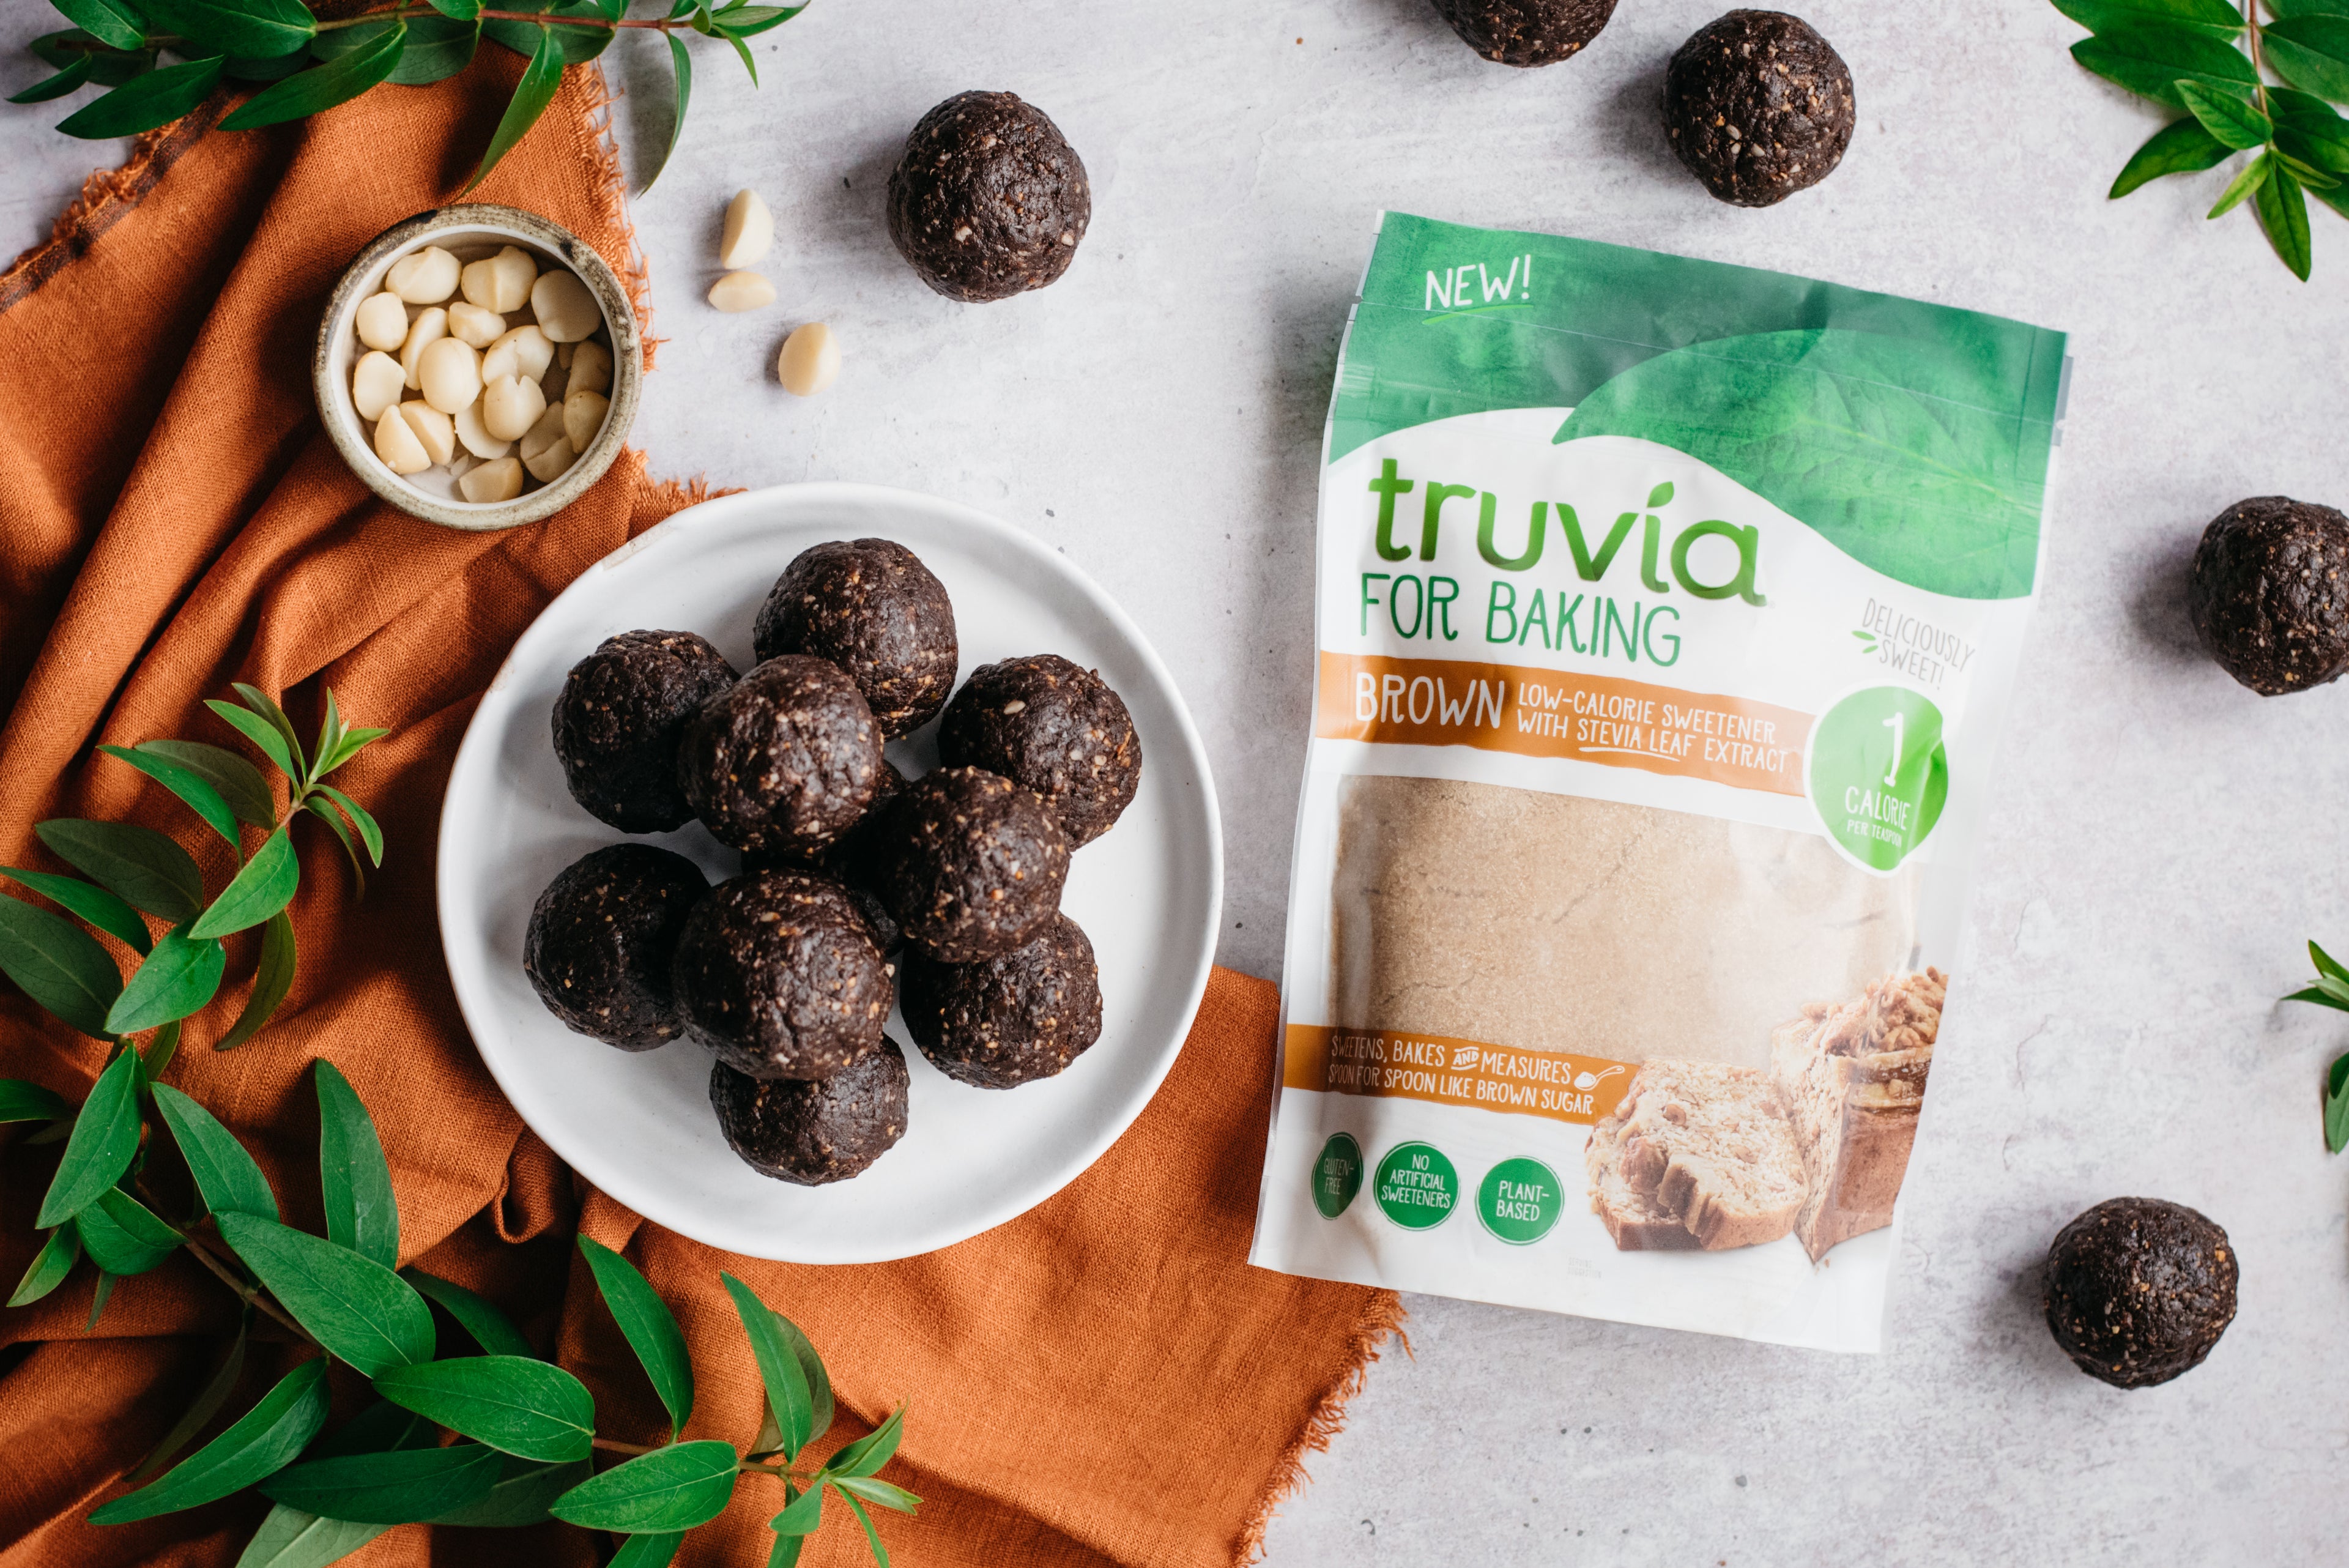 Top down view of a plate of raw vegan energy balls next to a pack of truvia for baking brown